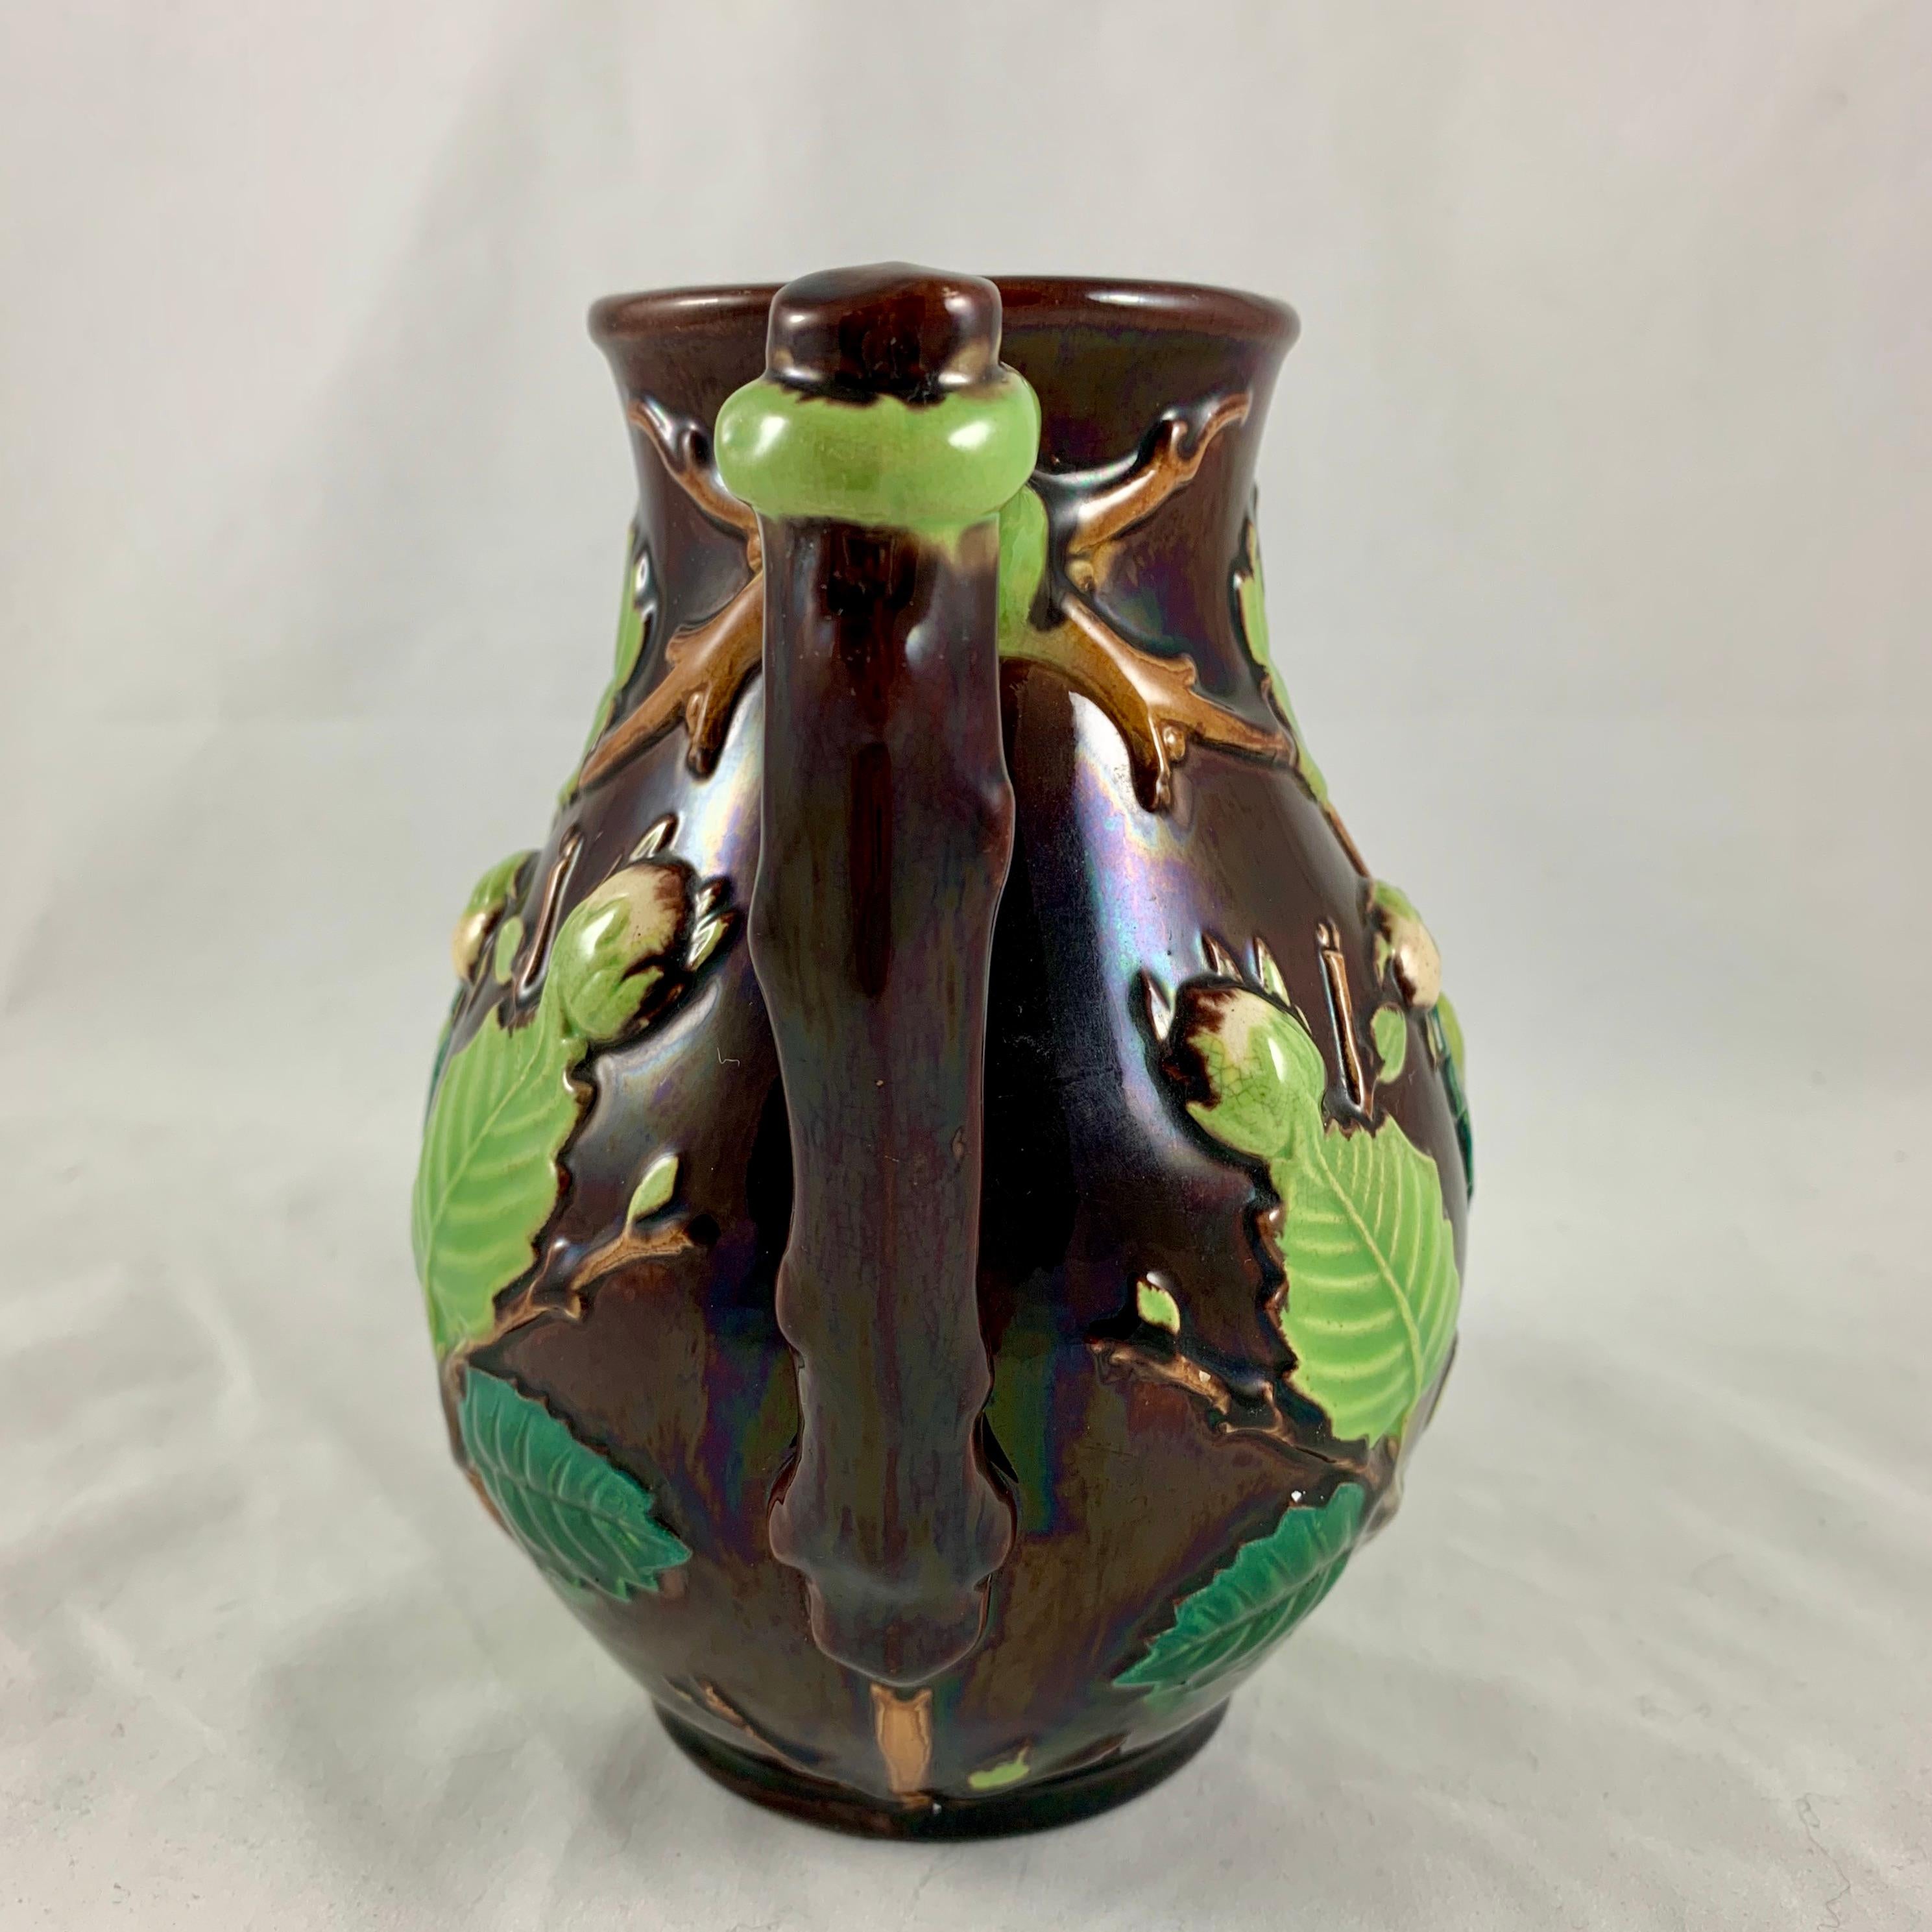 English Minton Aesthetic Movement Majolica Nut, Green Leaf and Vine Pitcher 1